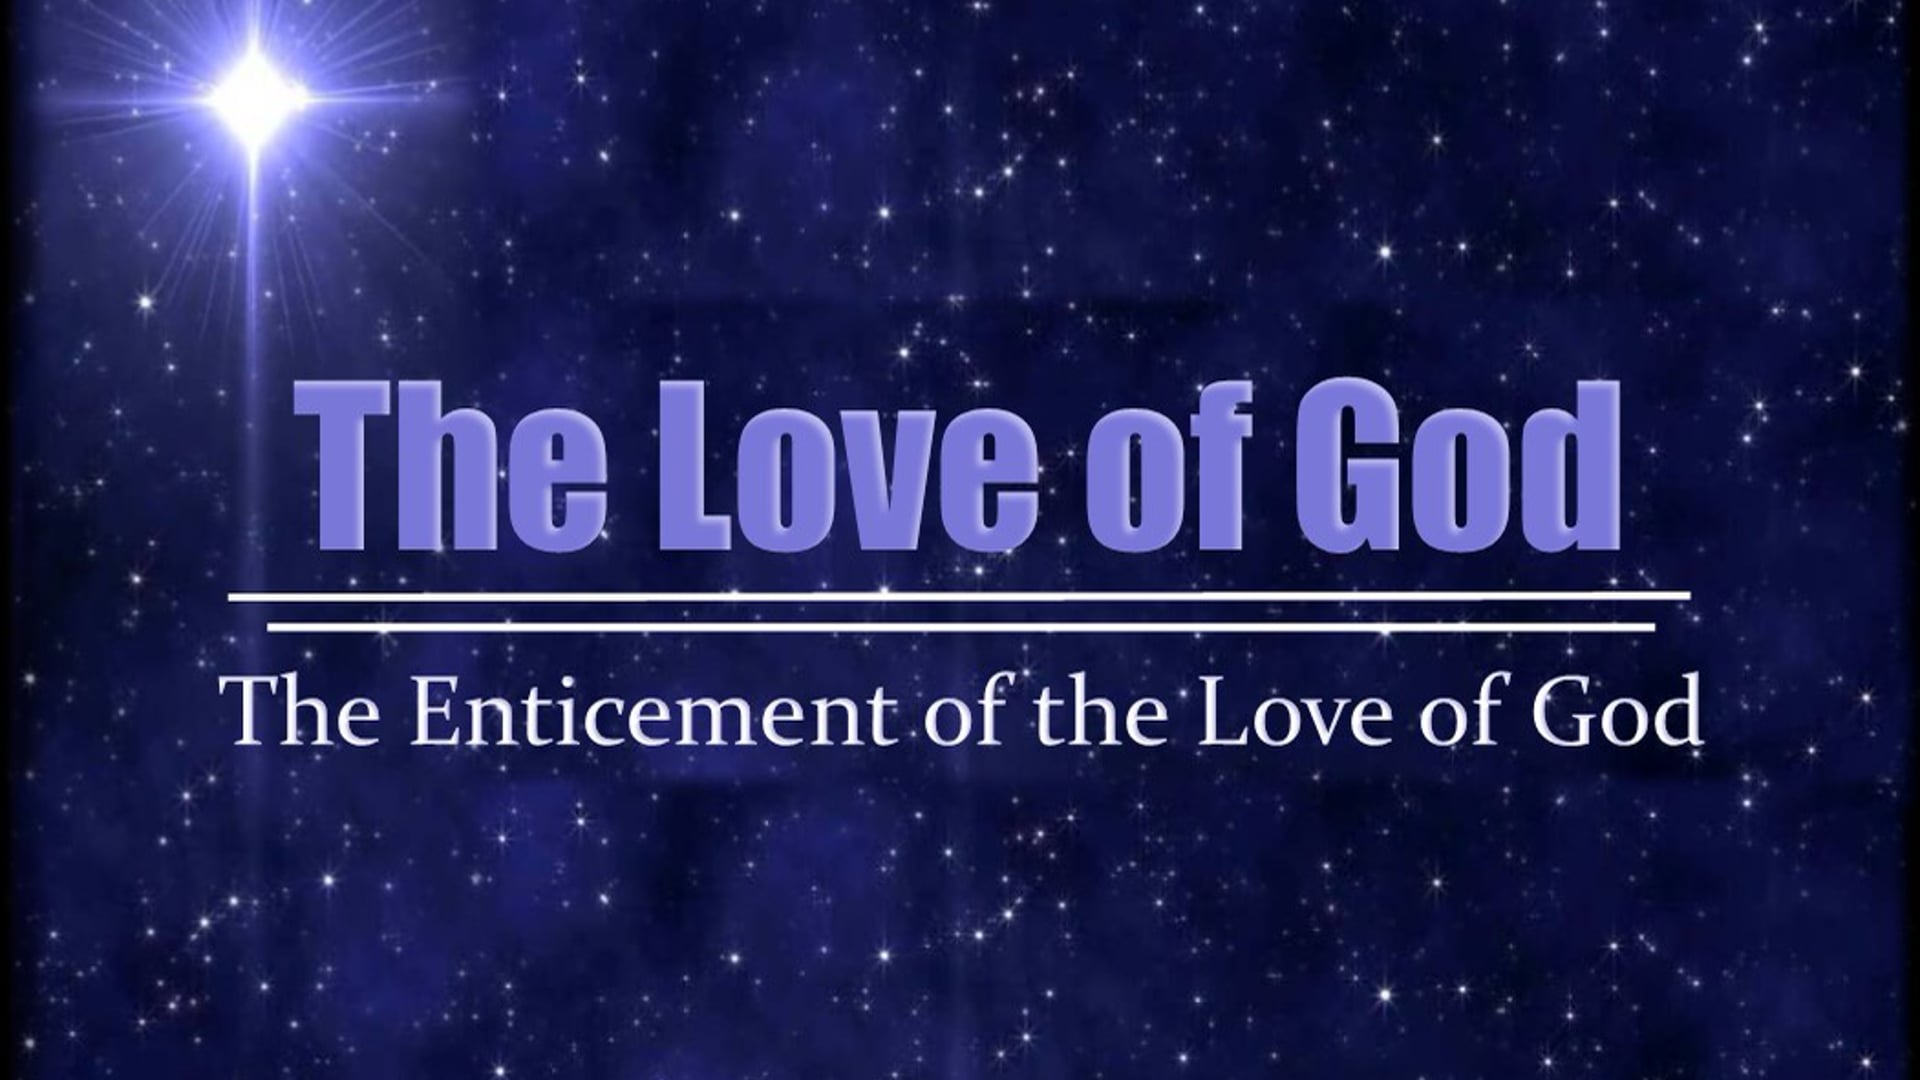 Feb 24 The enticement of God's Love